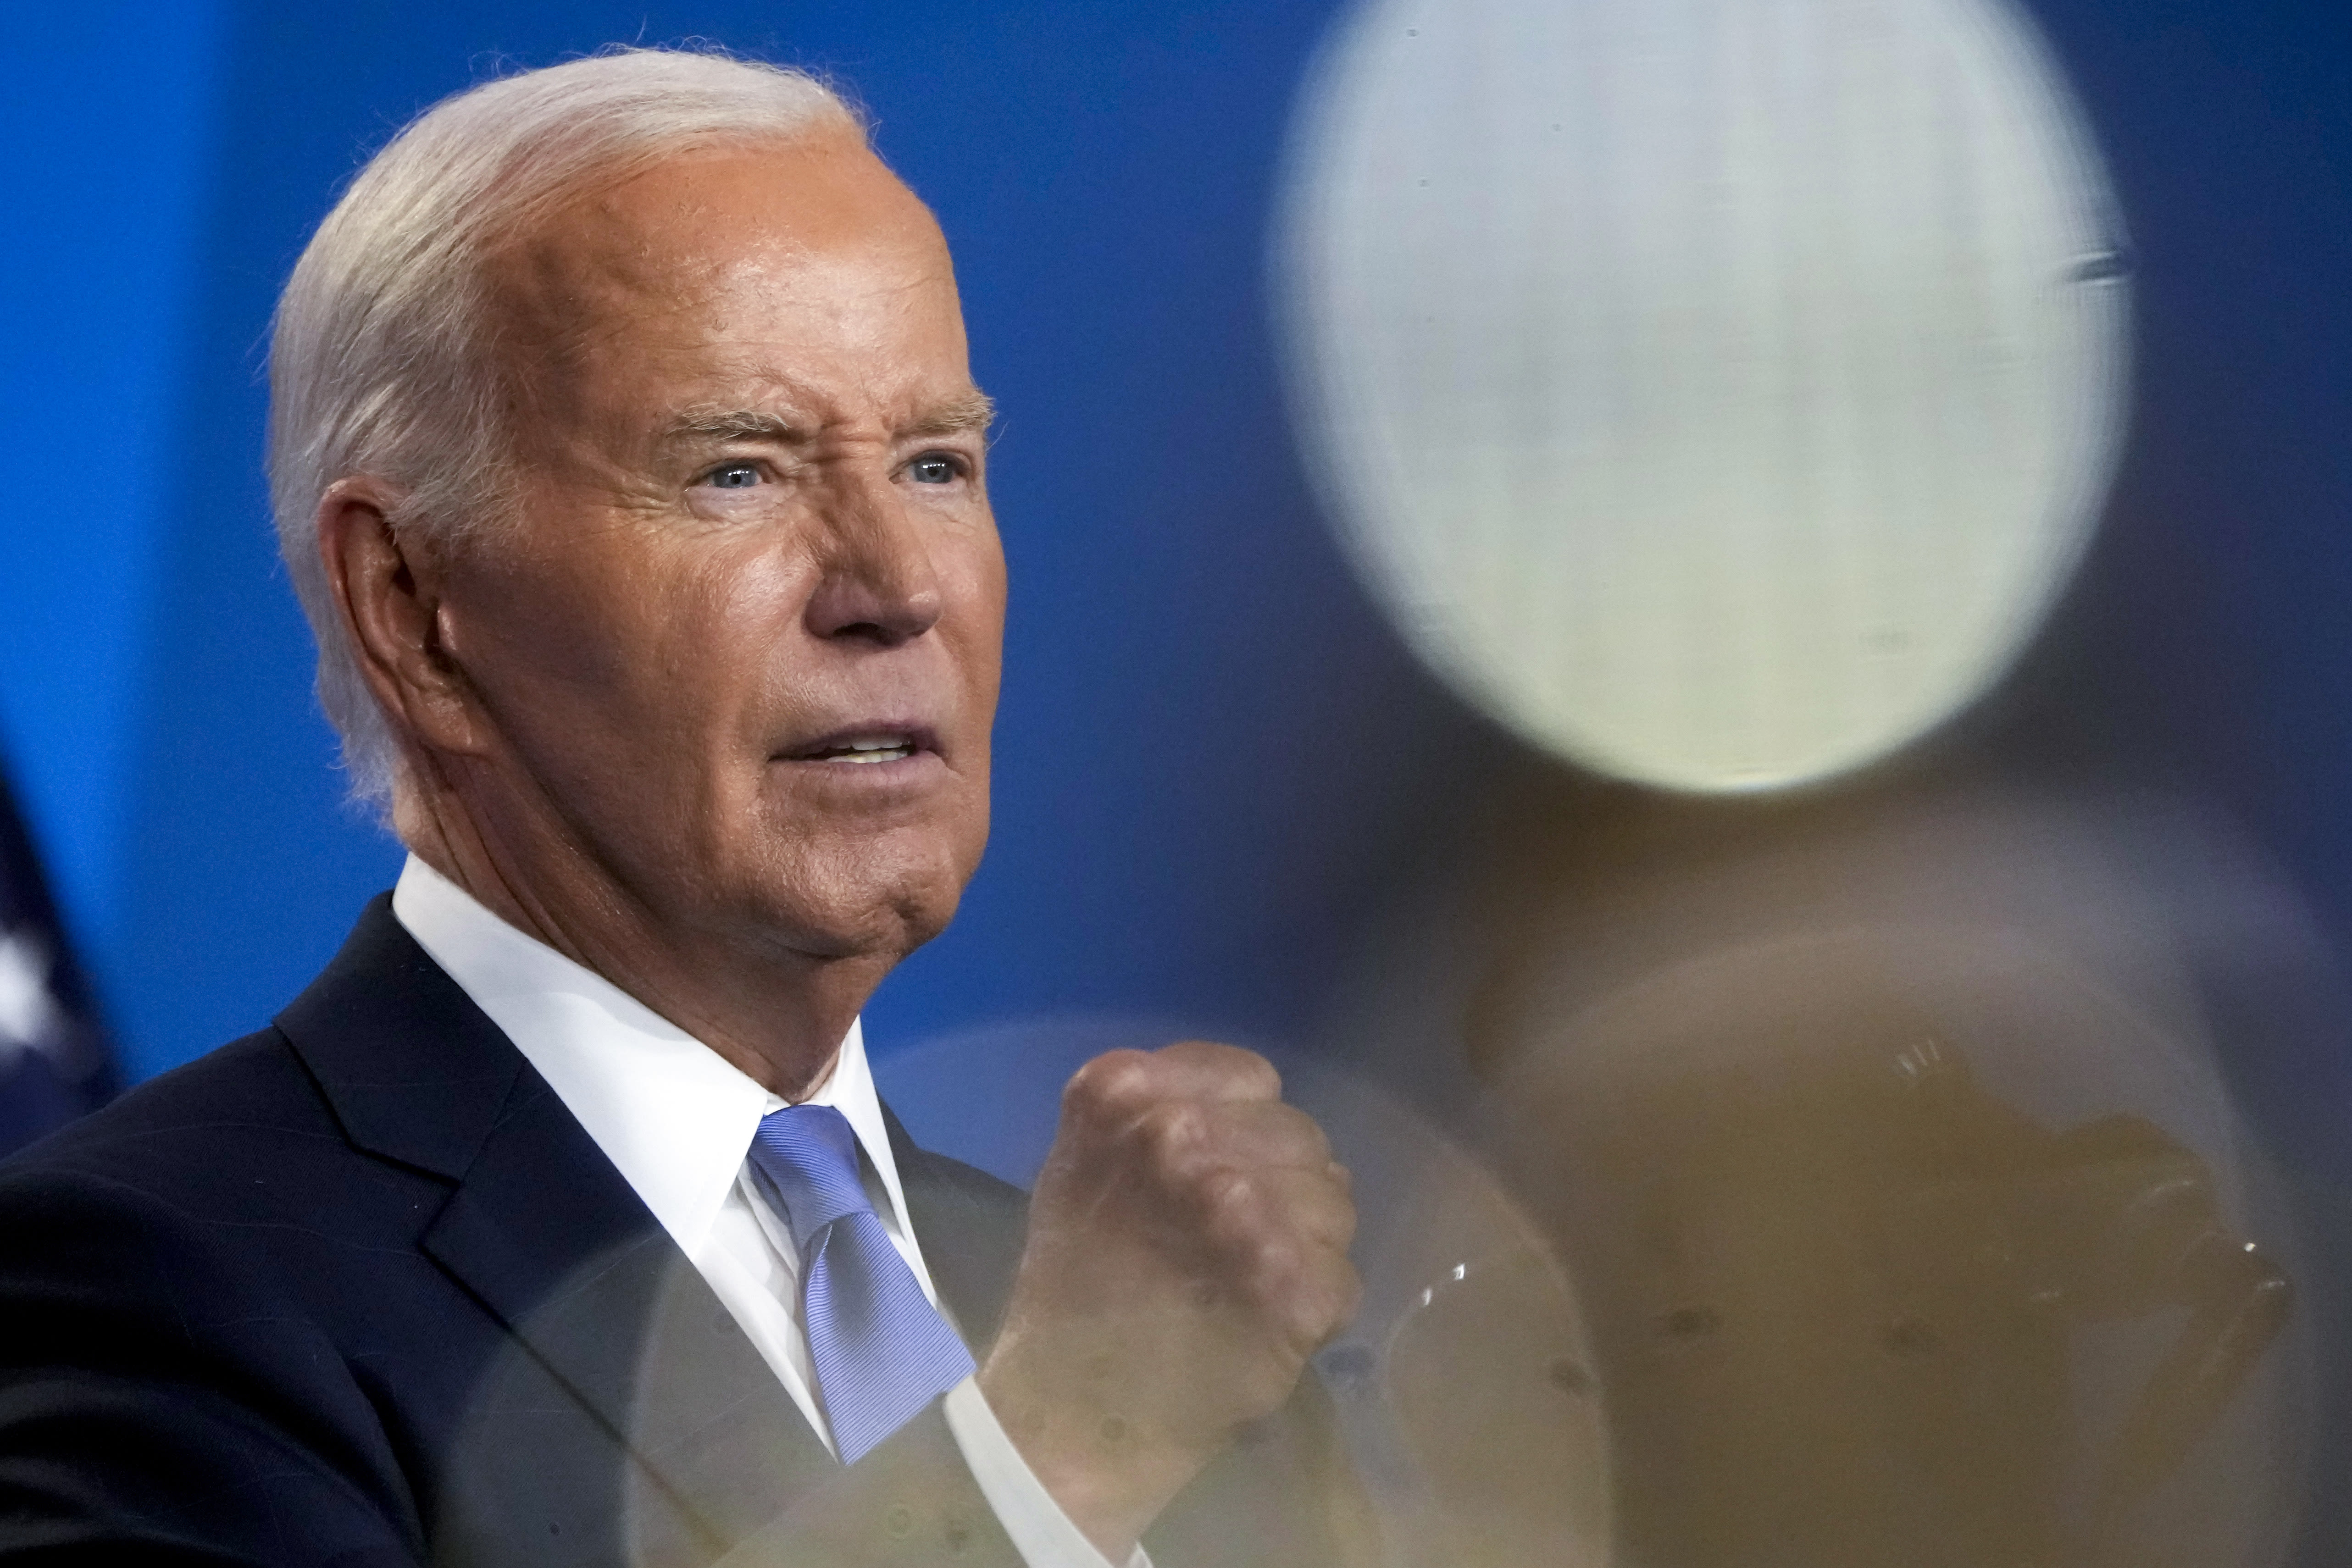 As Biden faces mounting calls to drop out, some prominent progressives, including AOC, are sticking by him